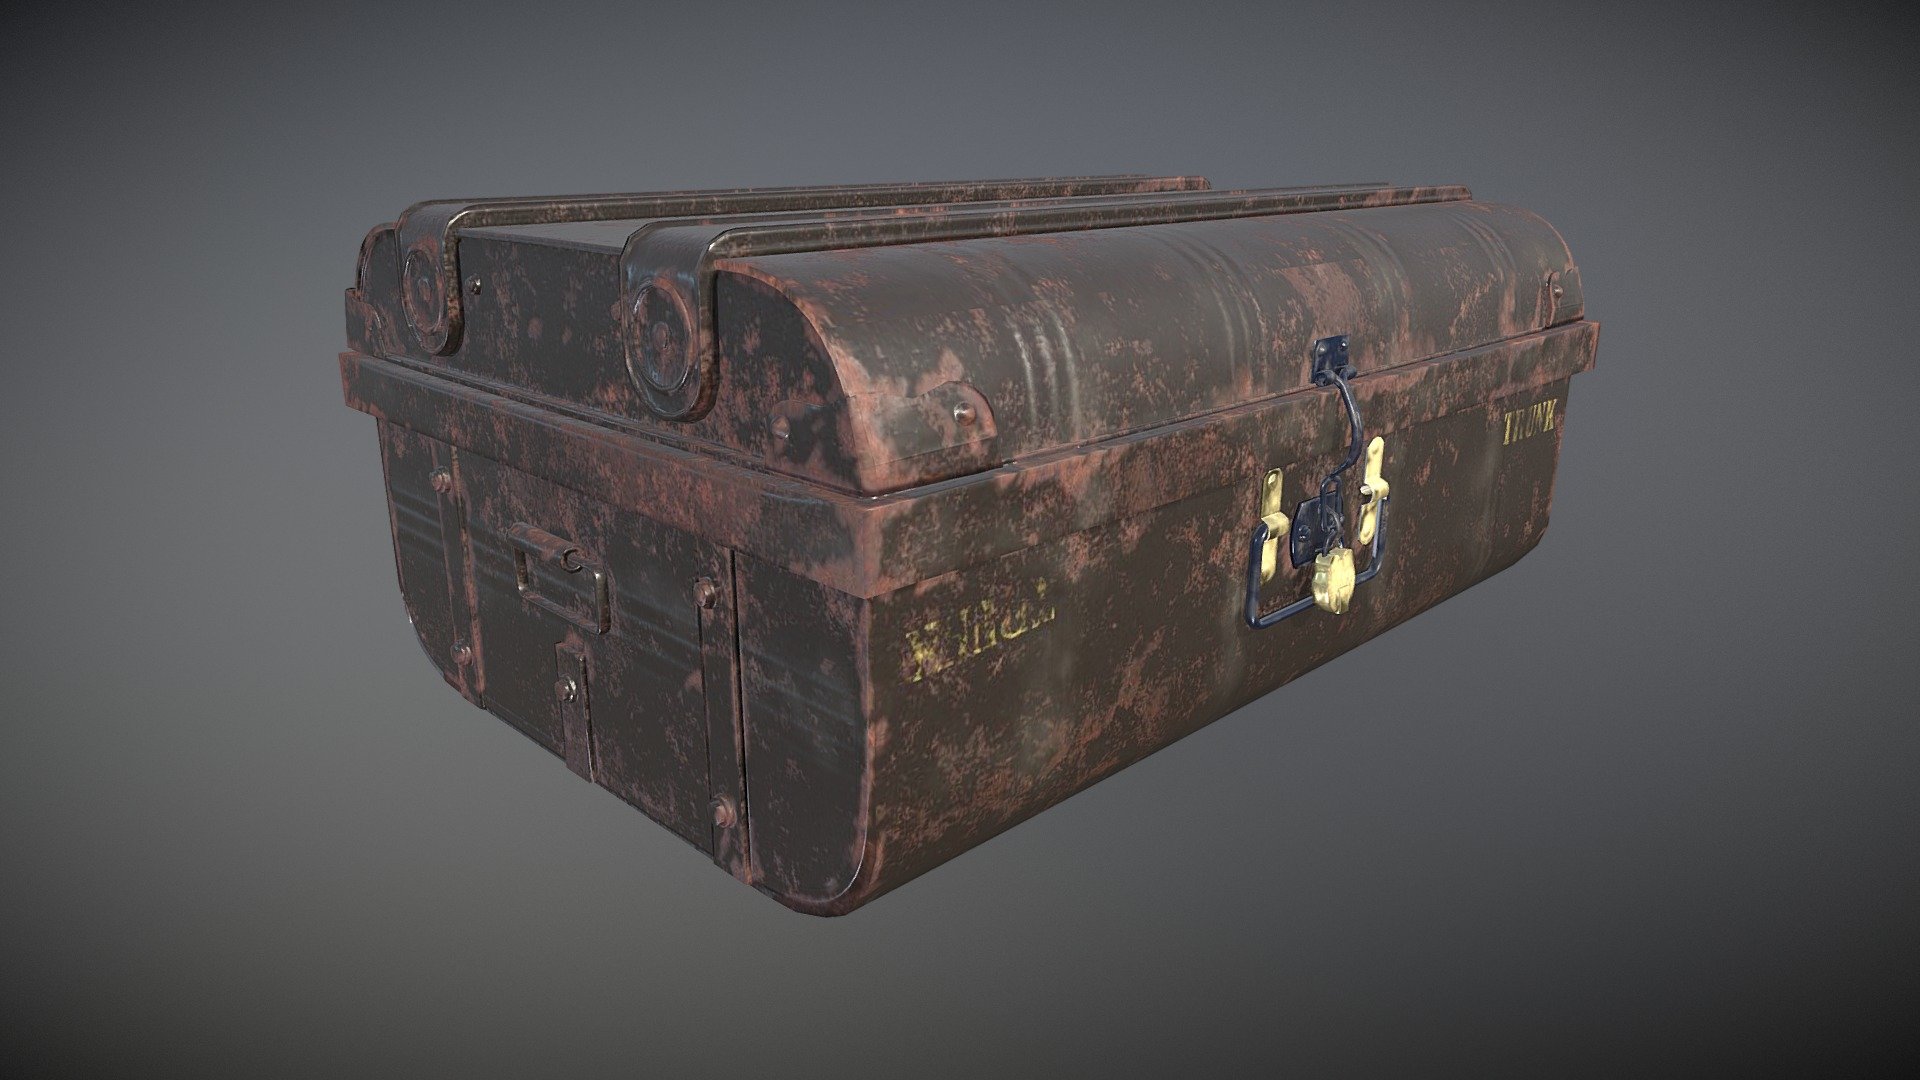 This is a case we had to create for a Game Art Pipeline assignment! Modelled in 3dsmax 2018 and baked/textured in substance painter. [Apologies for the terrible normal map though! It was my first try so there's a bunch of mistakes in it - still, feel free to use it if it can be of any use to you!]
Feedback is, as per usual, super appreciated. Thank you! - PBR Case: Vintage Trunk - Download Free 3D model by Christina Lauridsen (@Christina.Lauridsen) 3d model